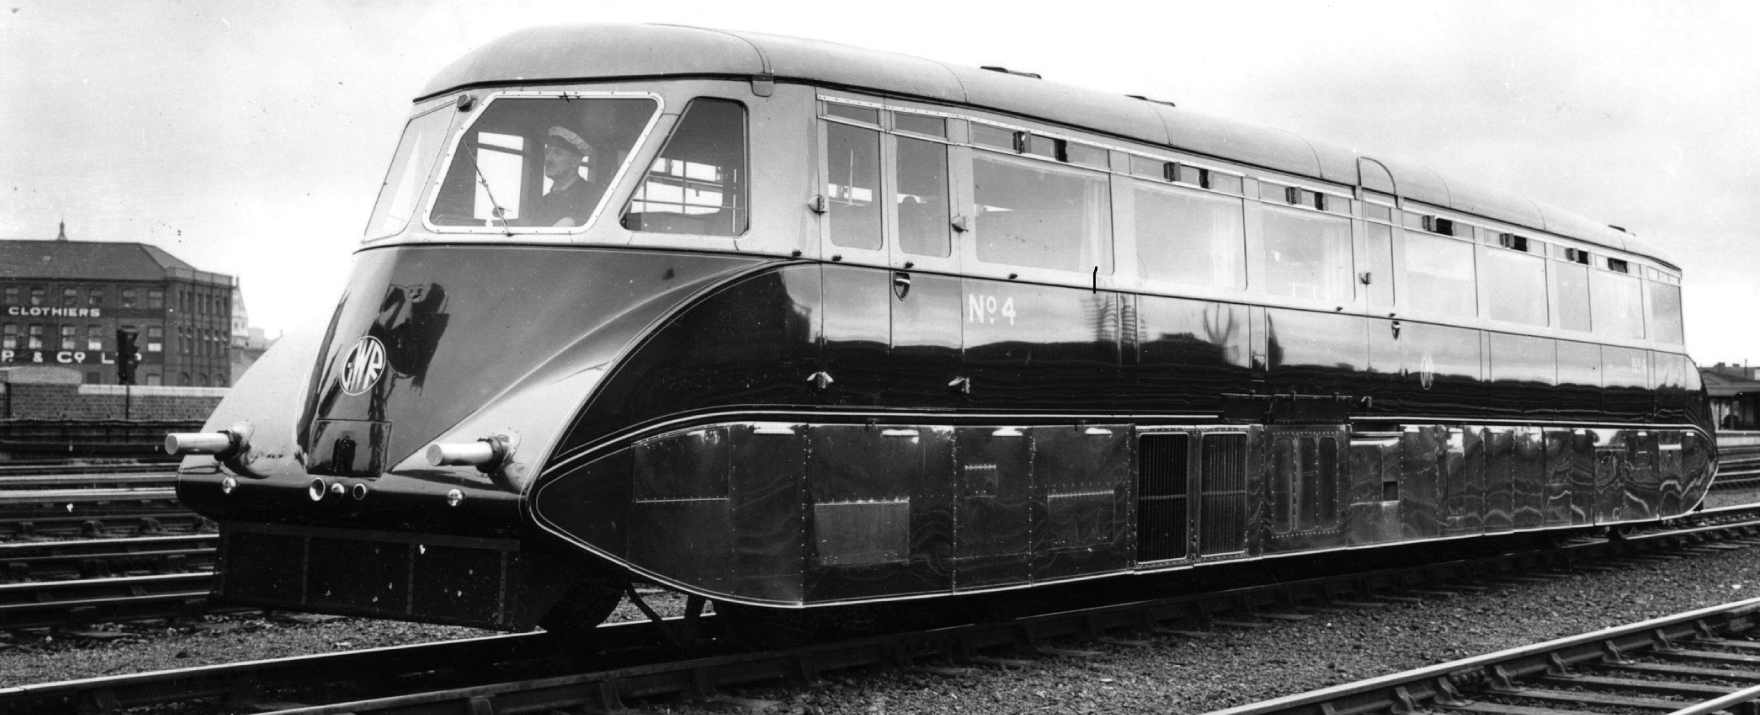 The elegant Art Deco lines of GWR railcar no 4 built by AEC and introduced to - photo 6